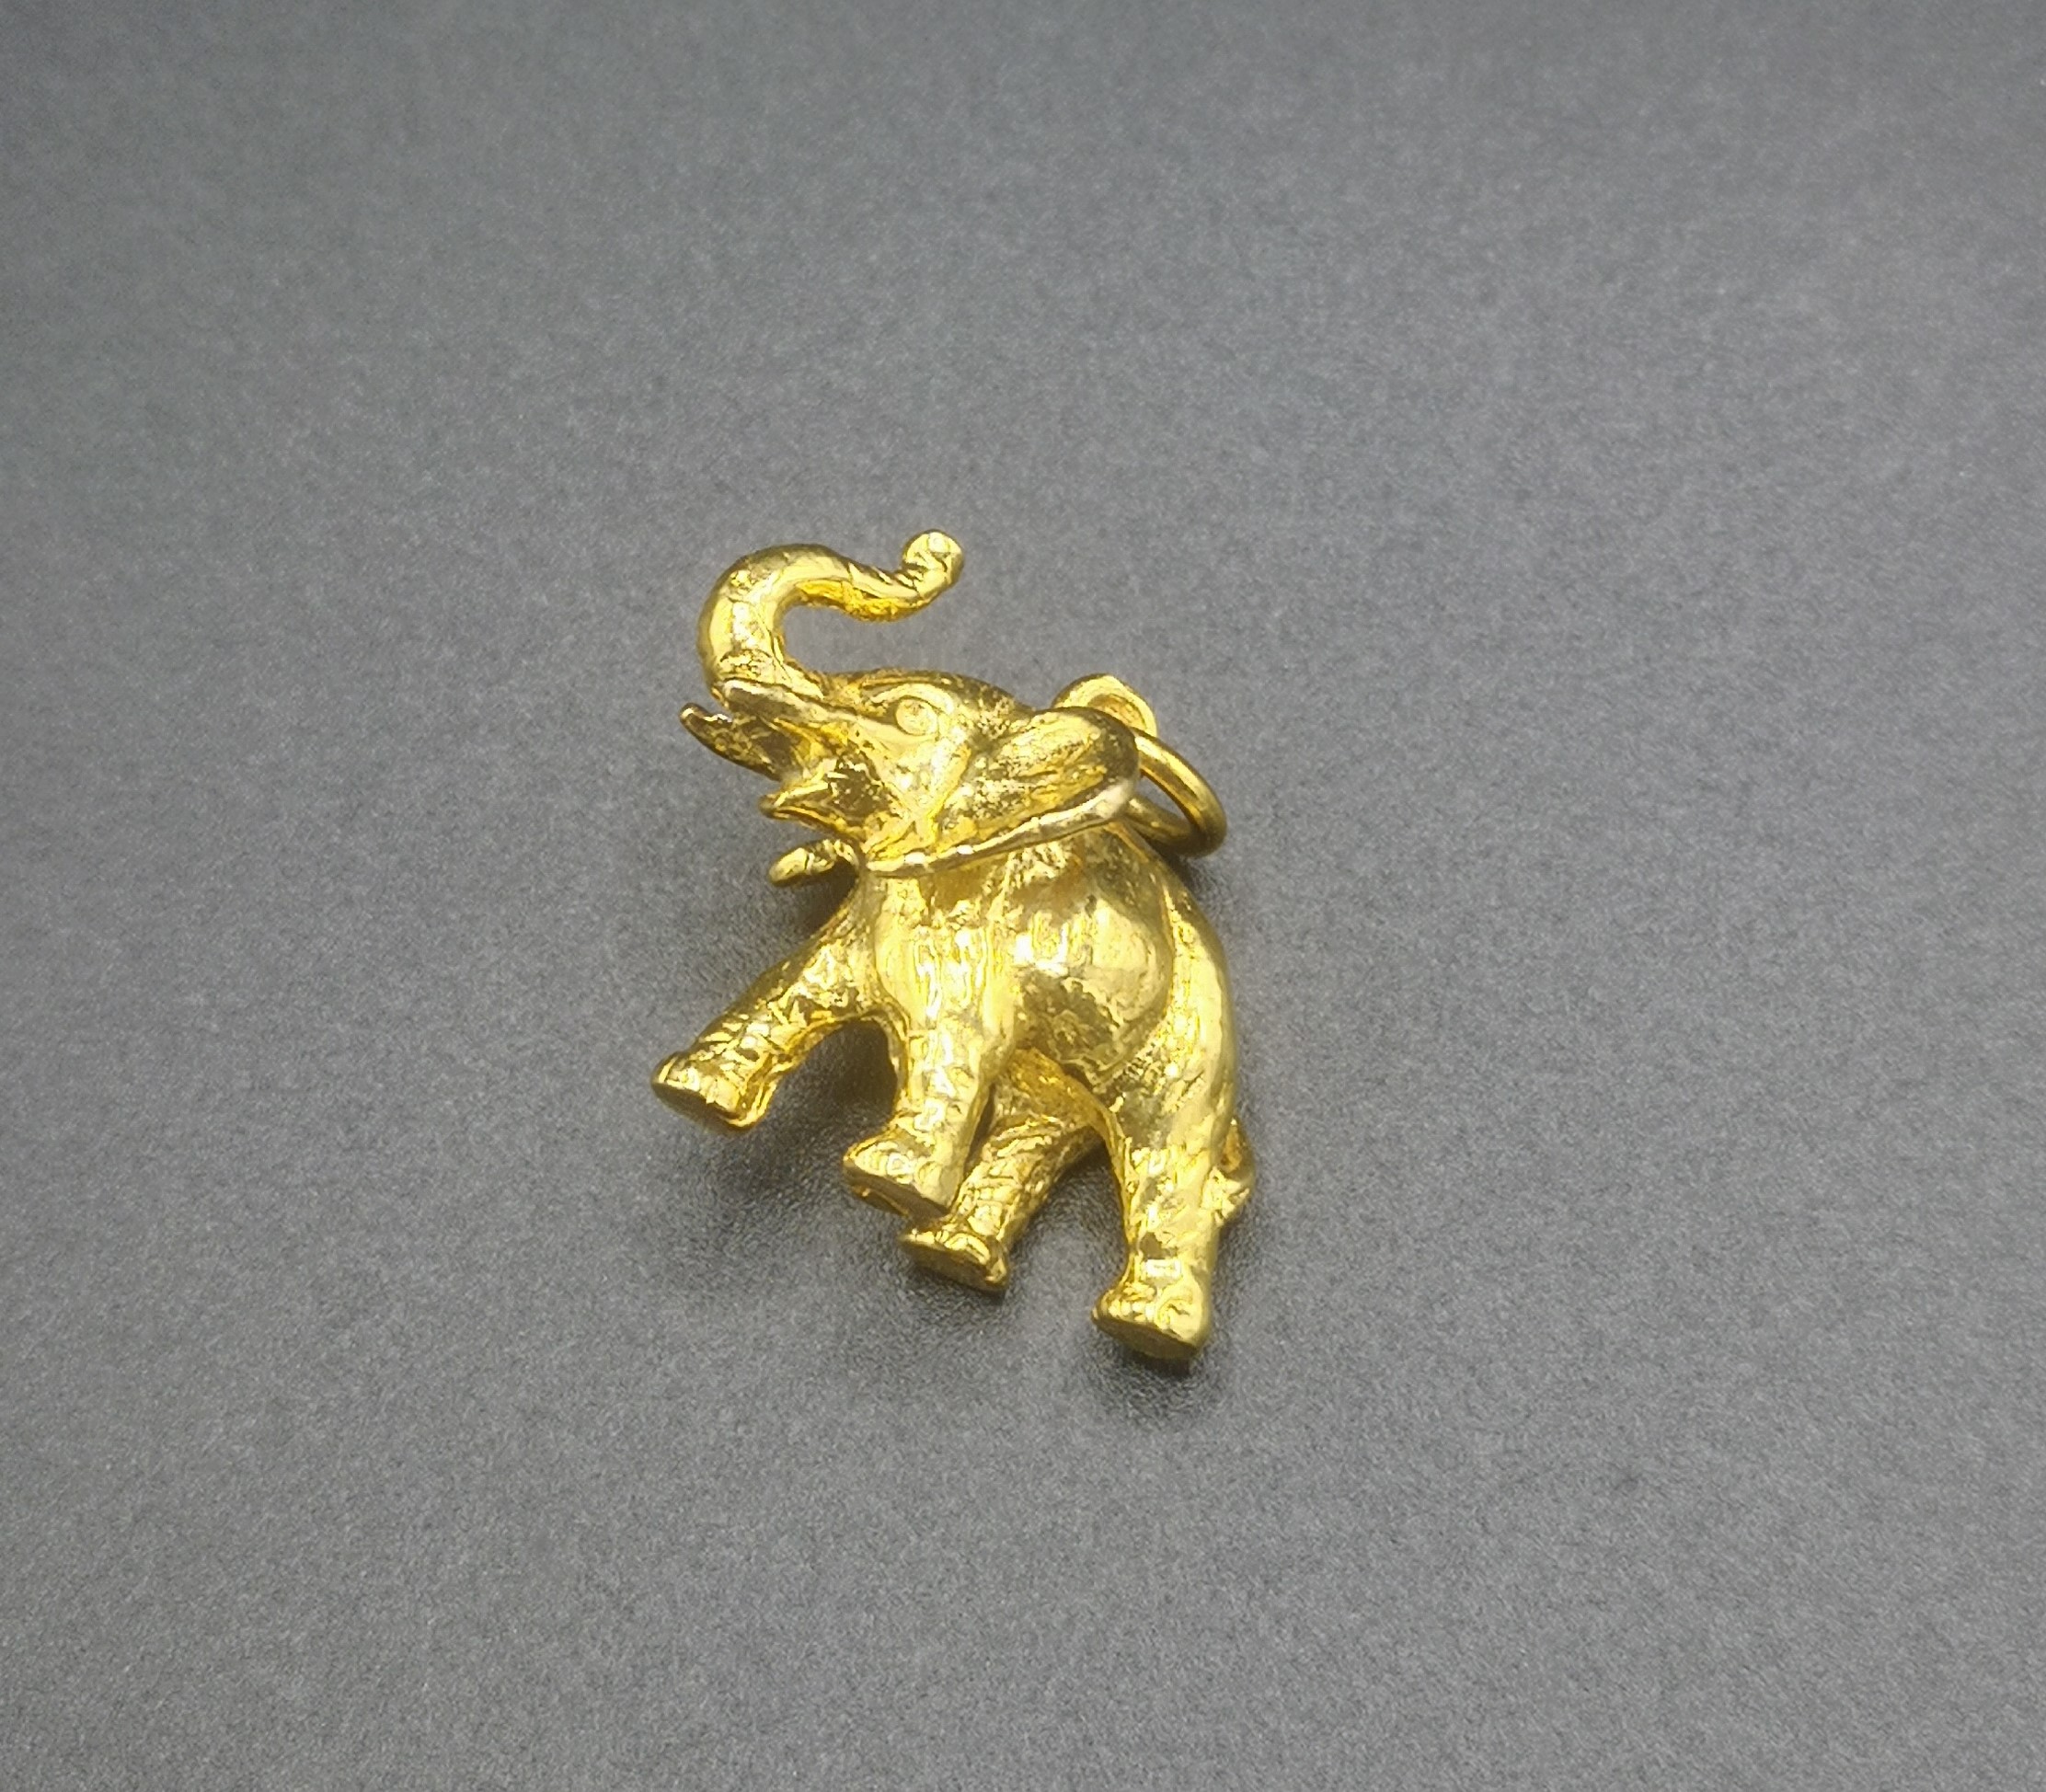 9ct gold pendant - Image 3 of 4